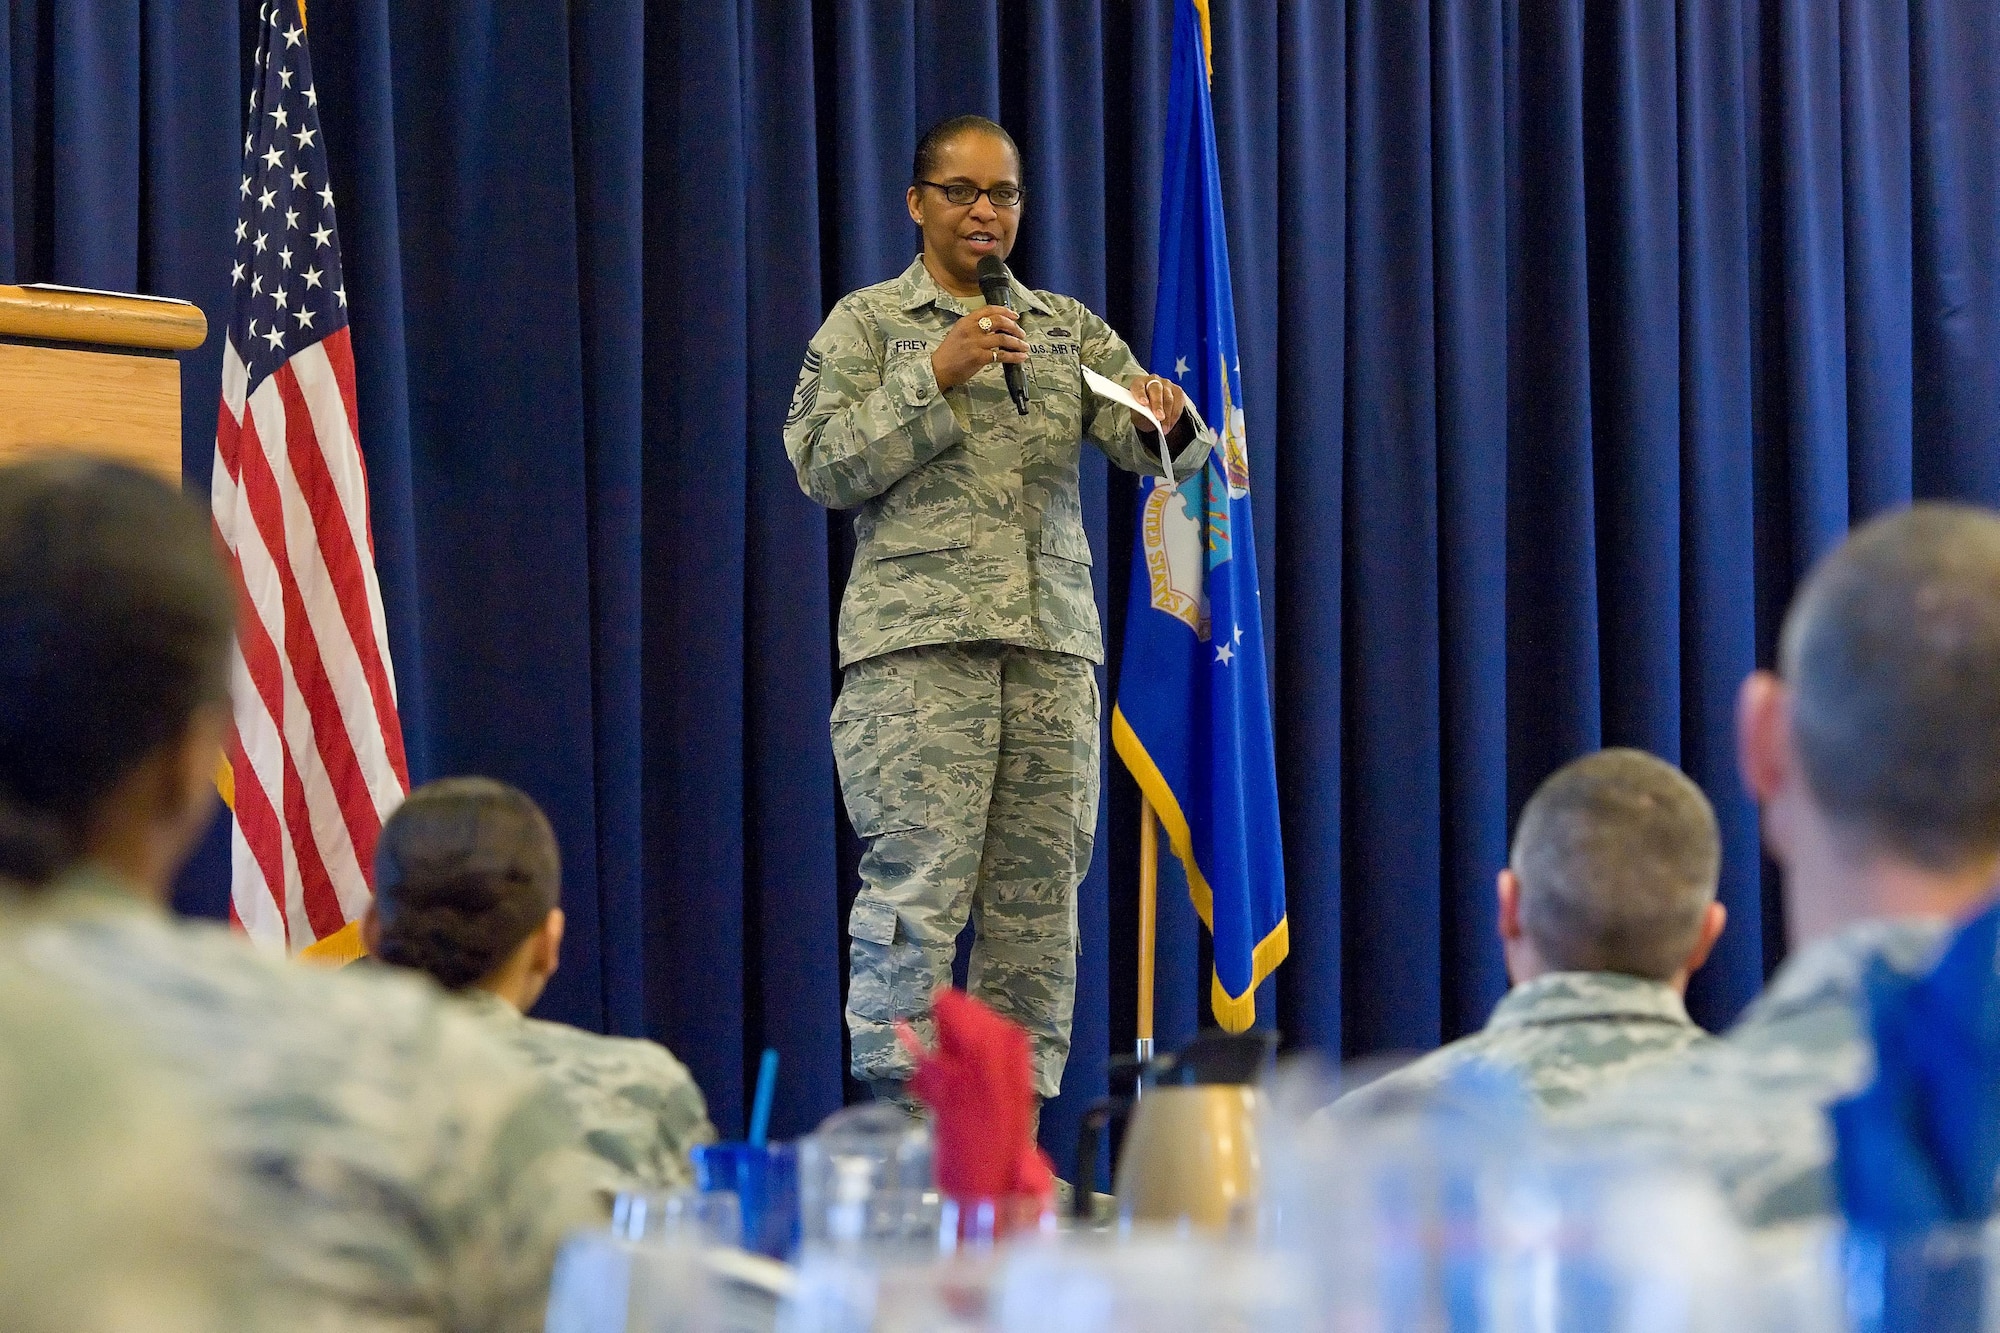 Chief Master Sgt. Shelina Frey, command chief for Air Mobility Command, Scott Air Force Base, Ill., speaks to Team Dover members during the Women's History Month Breakfast March 20, 2017, at The Landings on Dover Air Force Base, Del. Frey shared some of her personal dreams, struggles and triumphs in her life with more than 90 Airmen who attended the breakfast. (U.S. Air Force photo by Roland Balik)